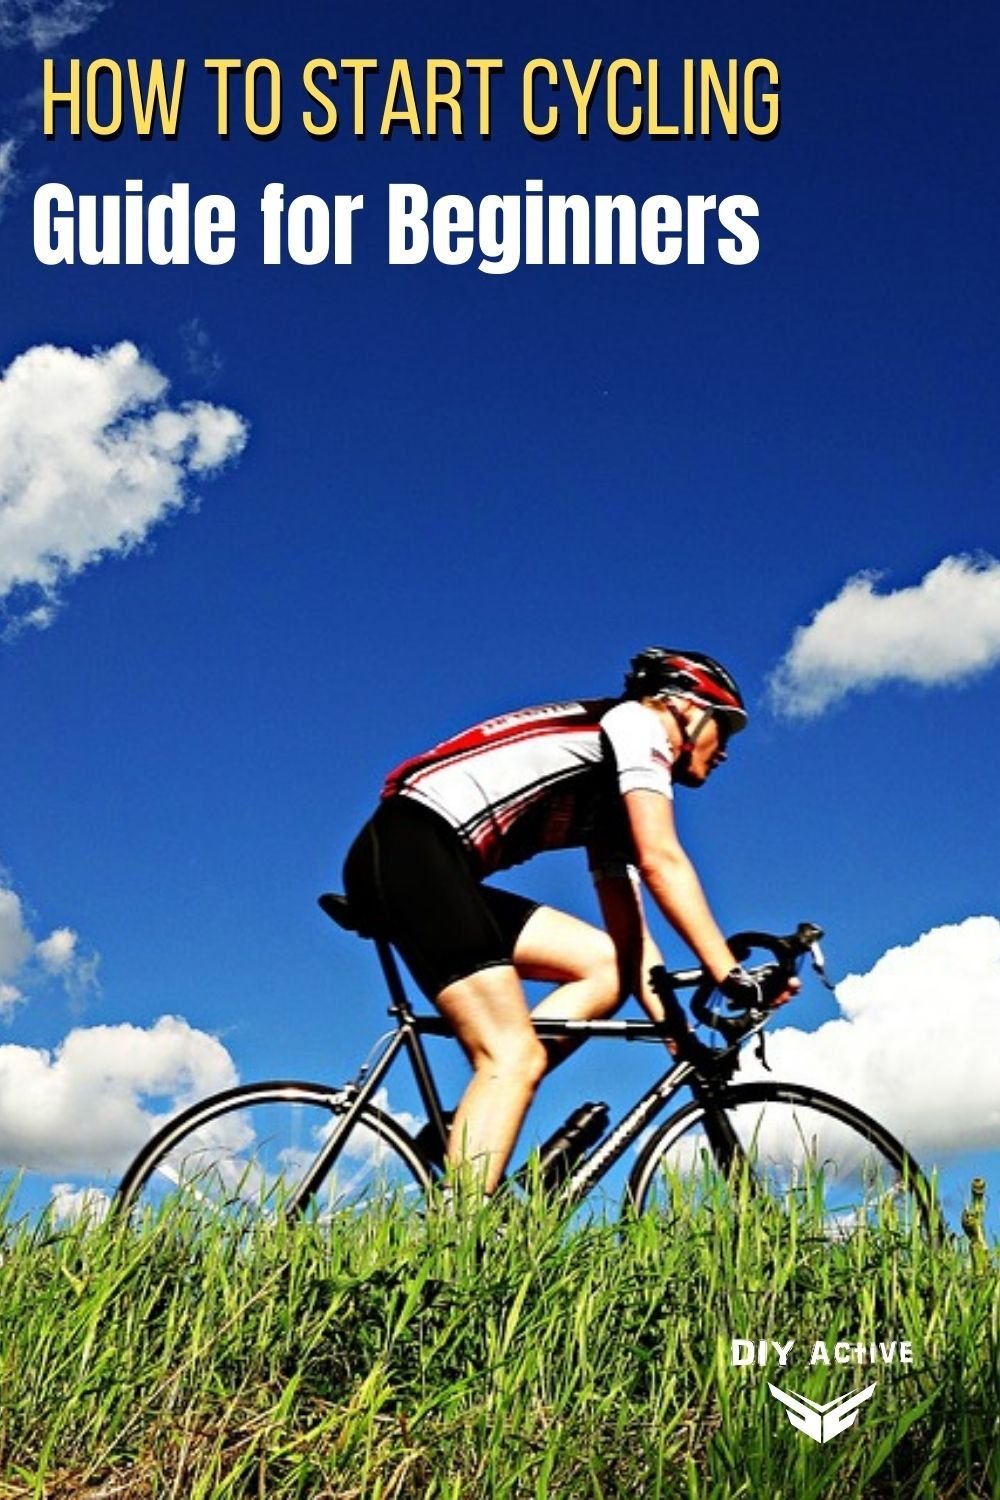 How to Start Cycling Guide for Beginners